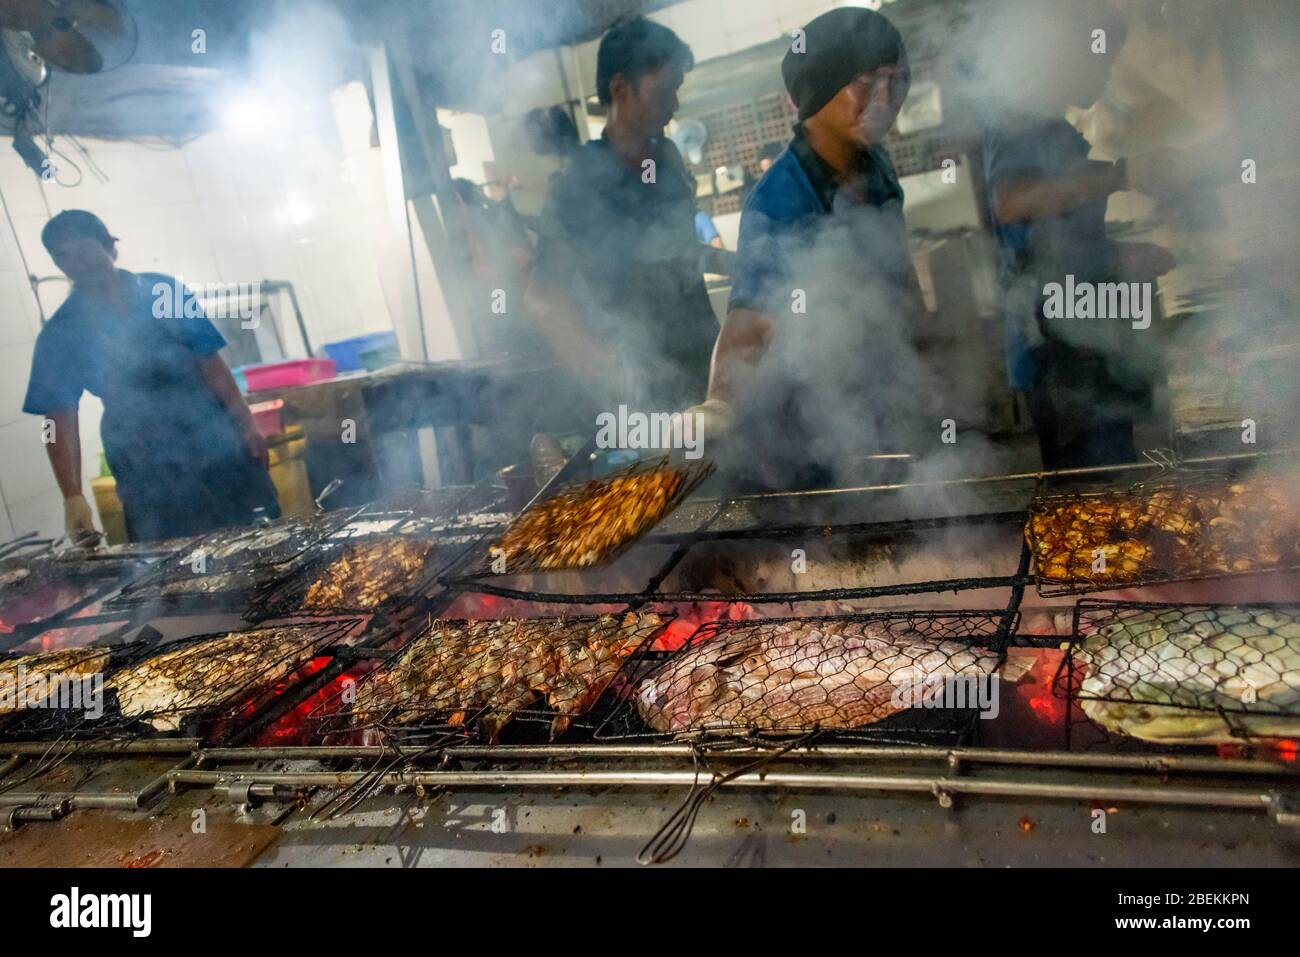 Horizontal view of a huge barbeque at a seafood restaurant in Bali, Indonesia. Stock Photo